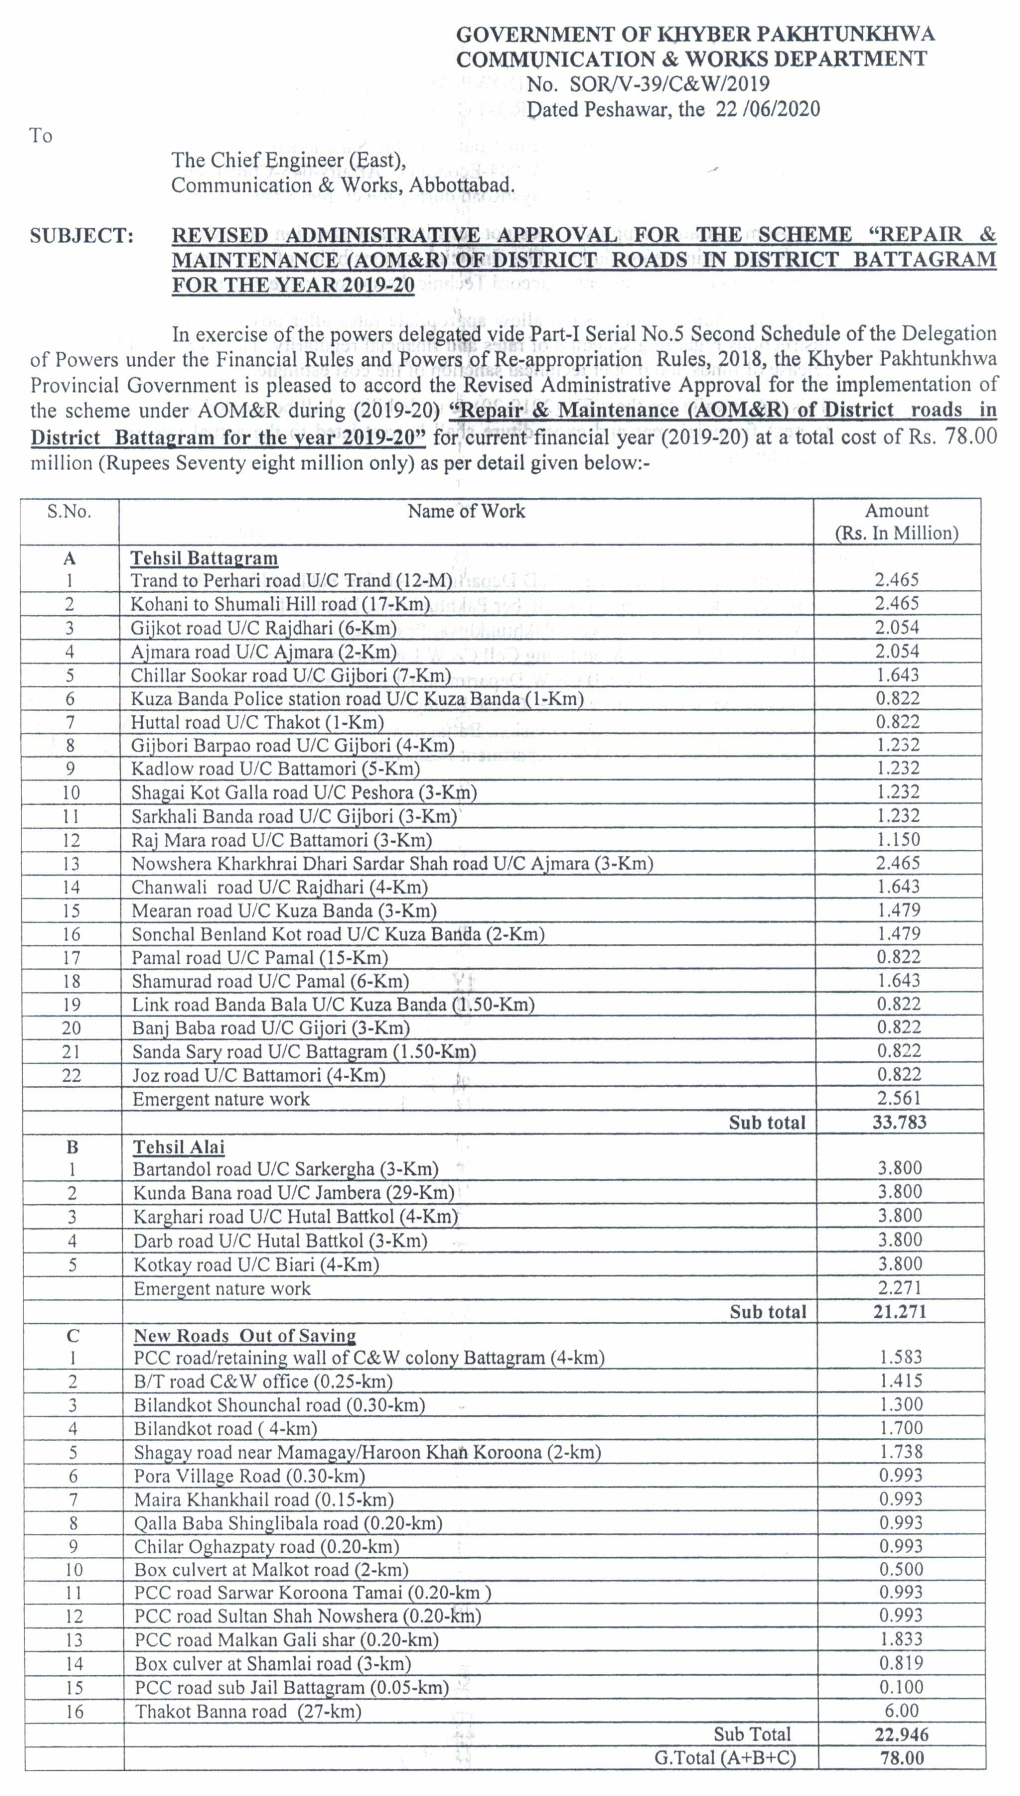 Revised Administrative Approval for the Scheme "Repair & Maintenance (Aom&R) of District Roads in District Battagram for the Year 2019-20